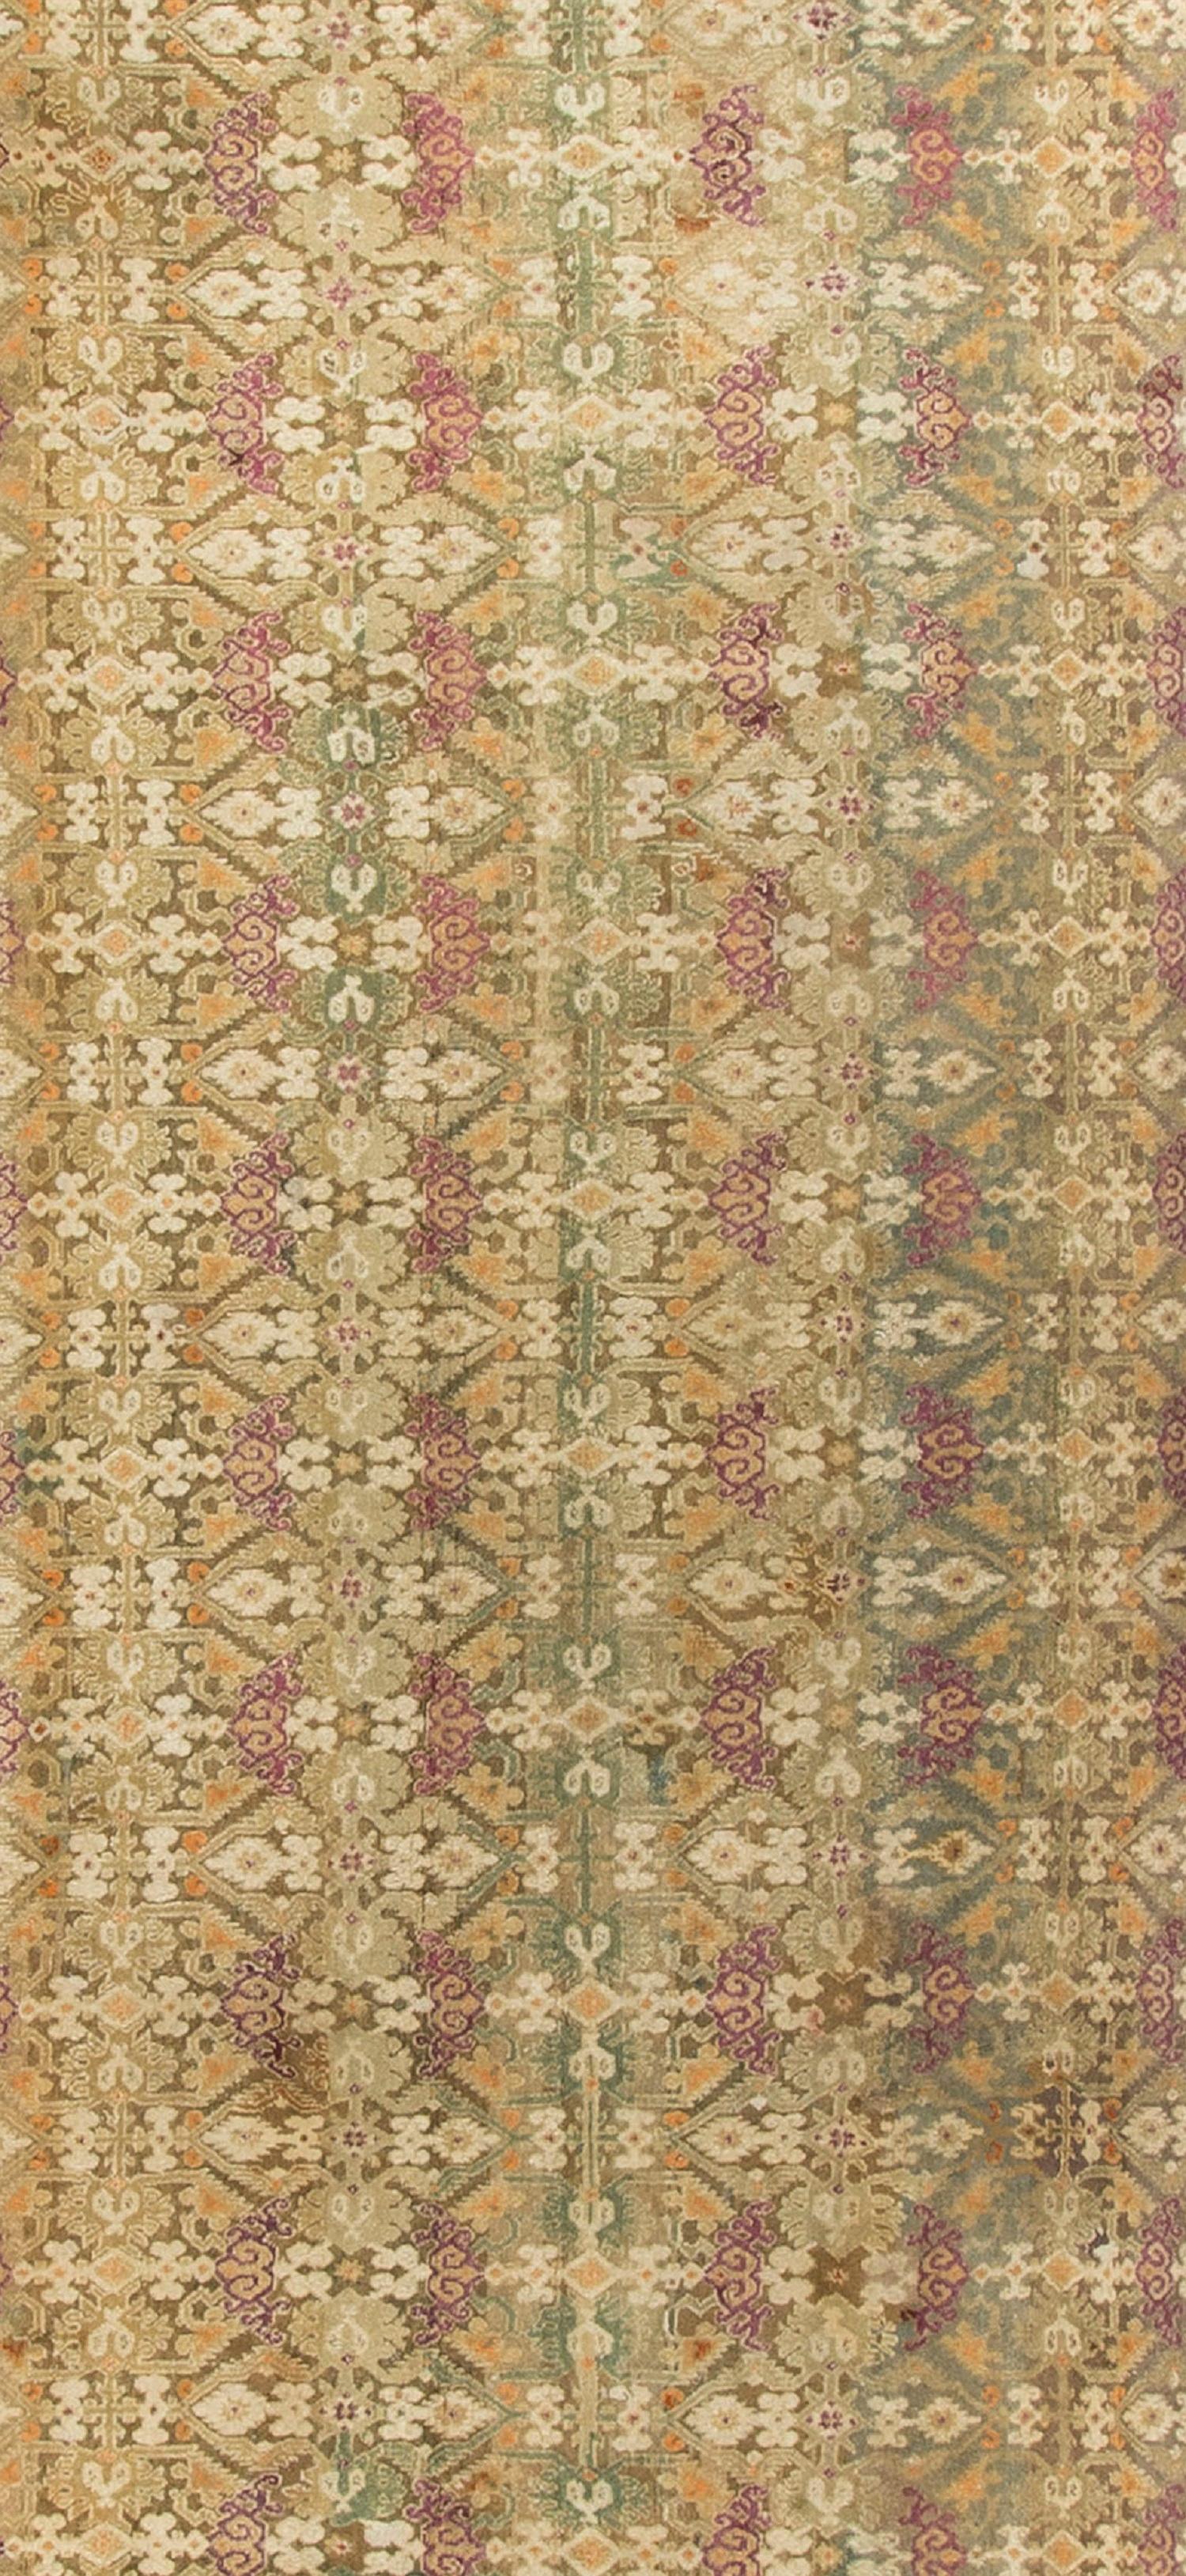 A wonderful antique Agra rug in an unusual hard to find size. Agra rugs and carpets of the 19th century are very desirable and are prized for their rich tonality, large sizes and traditional patterns.
 